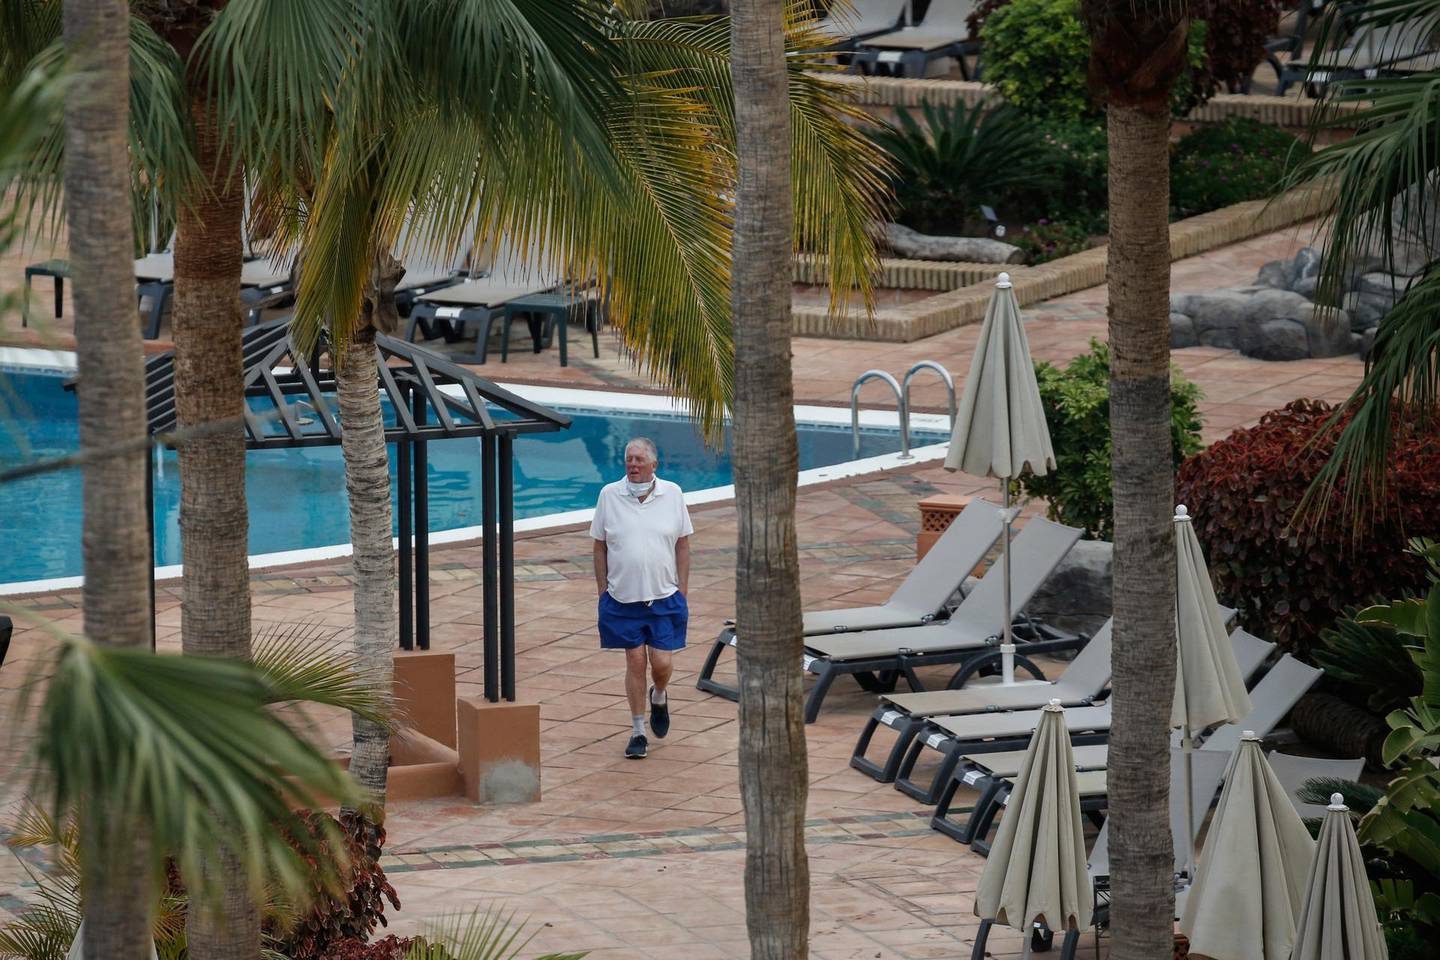 A man walks next the swimming pool of the H10 Costa Adeje Palace hotel in La Caleta, in the Canary Island of Tenerife, Spain, Thursday, Feb. 27, 2020. Spanish officials say a tourist hotel on the Canary Island of Tenerife has been placed in quarantine after an Italian doctor staying there tested positive for the COVID-19 virus and Spanish news media says some 1,000 tourists staying at the complex are not allowed to leave. (AP Photo/Joan Mateu)